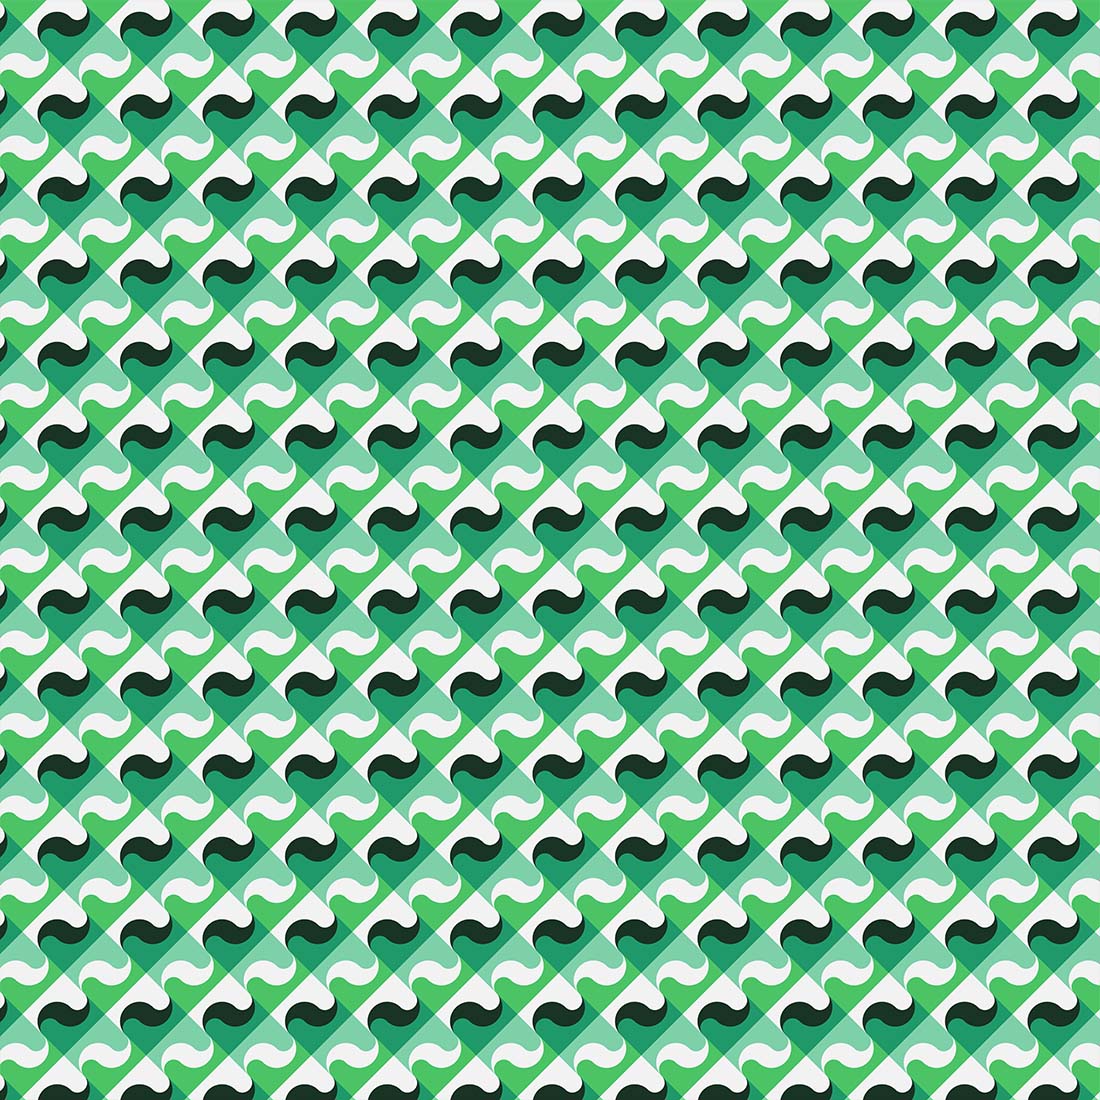 Green and white abstract pattern with wavy shapes.